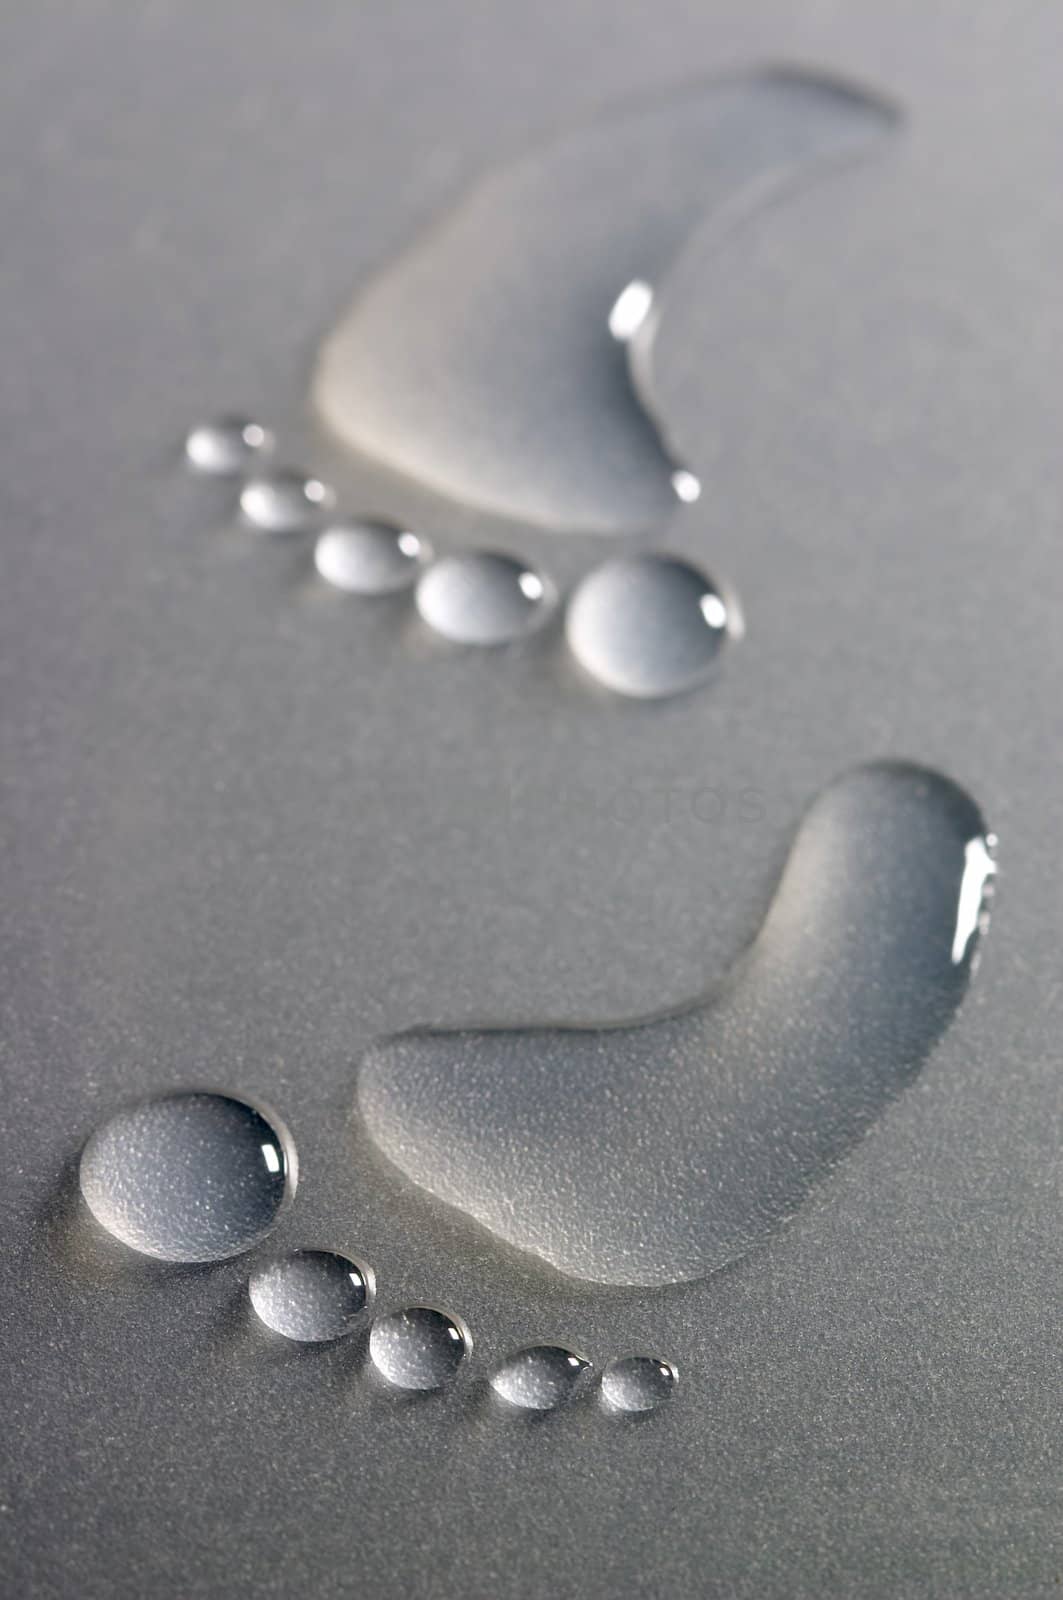 Bare human footprints made from drops of water